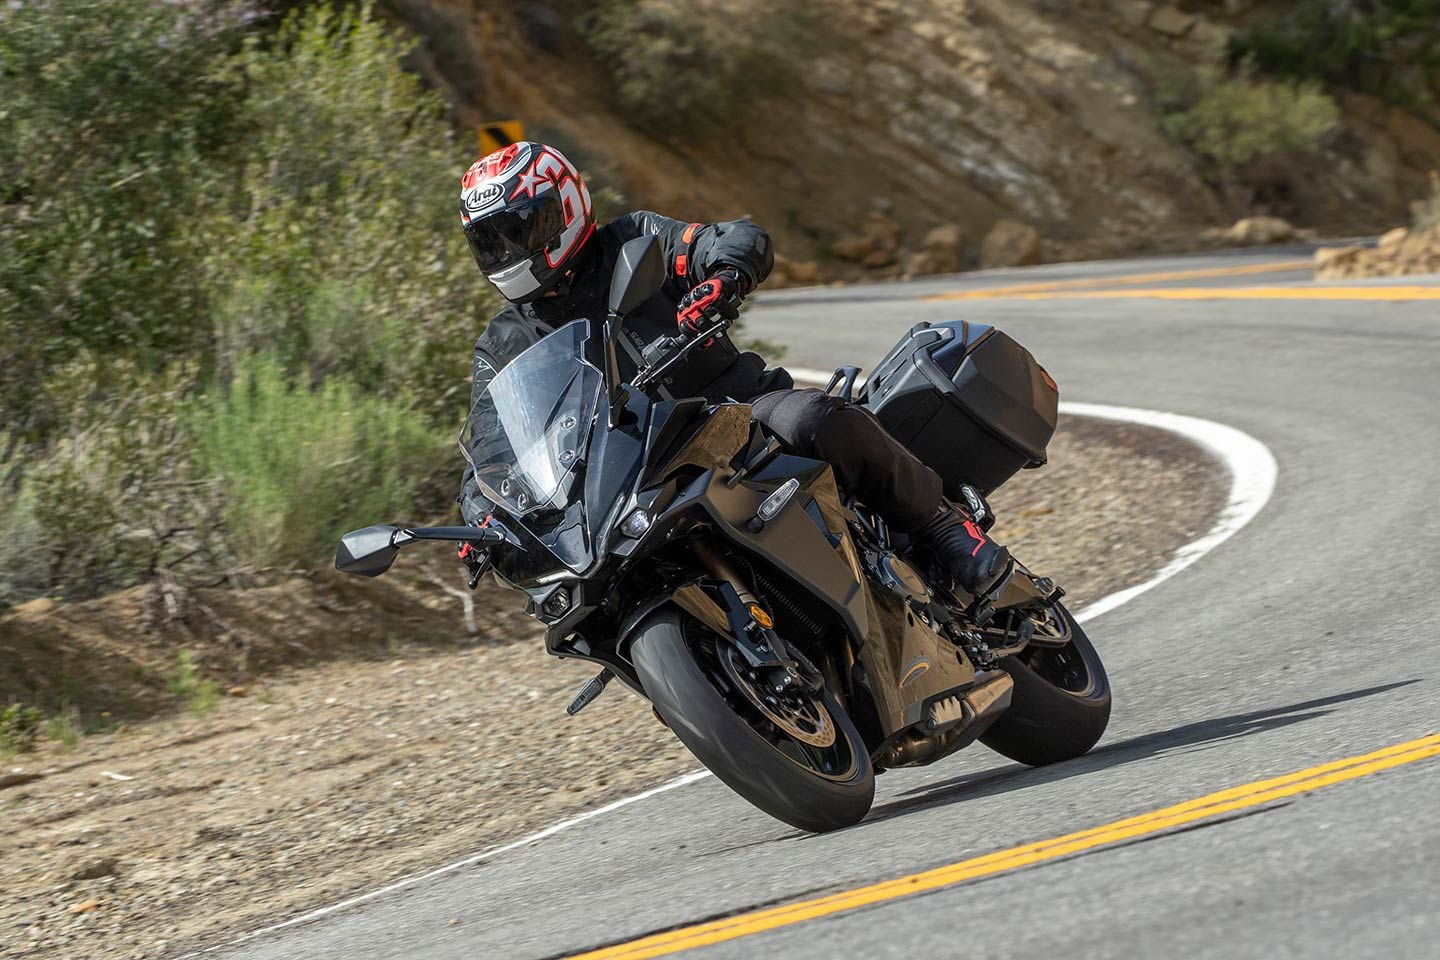 Suzuki’s proven, twin-spar aluminum frame offers up nimble handling and great road feedback, ensuring that the GT is fun to ride when the road tightens up.